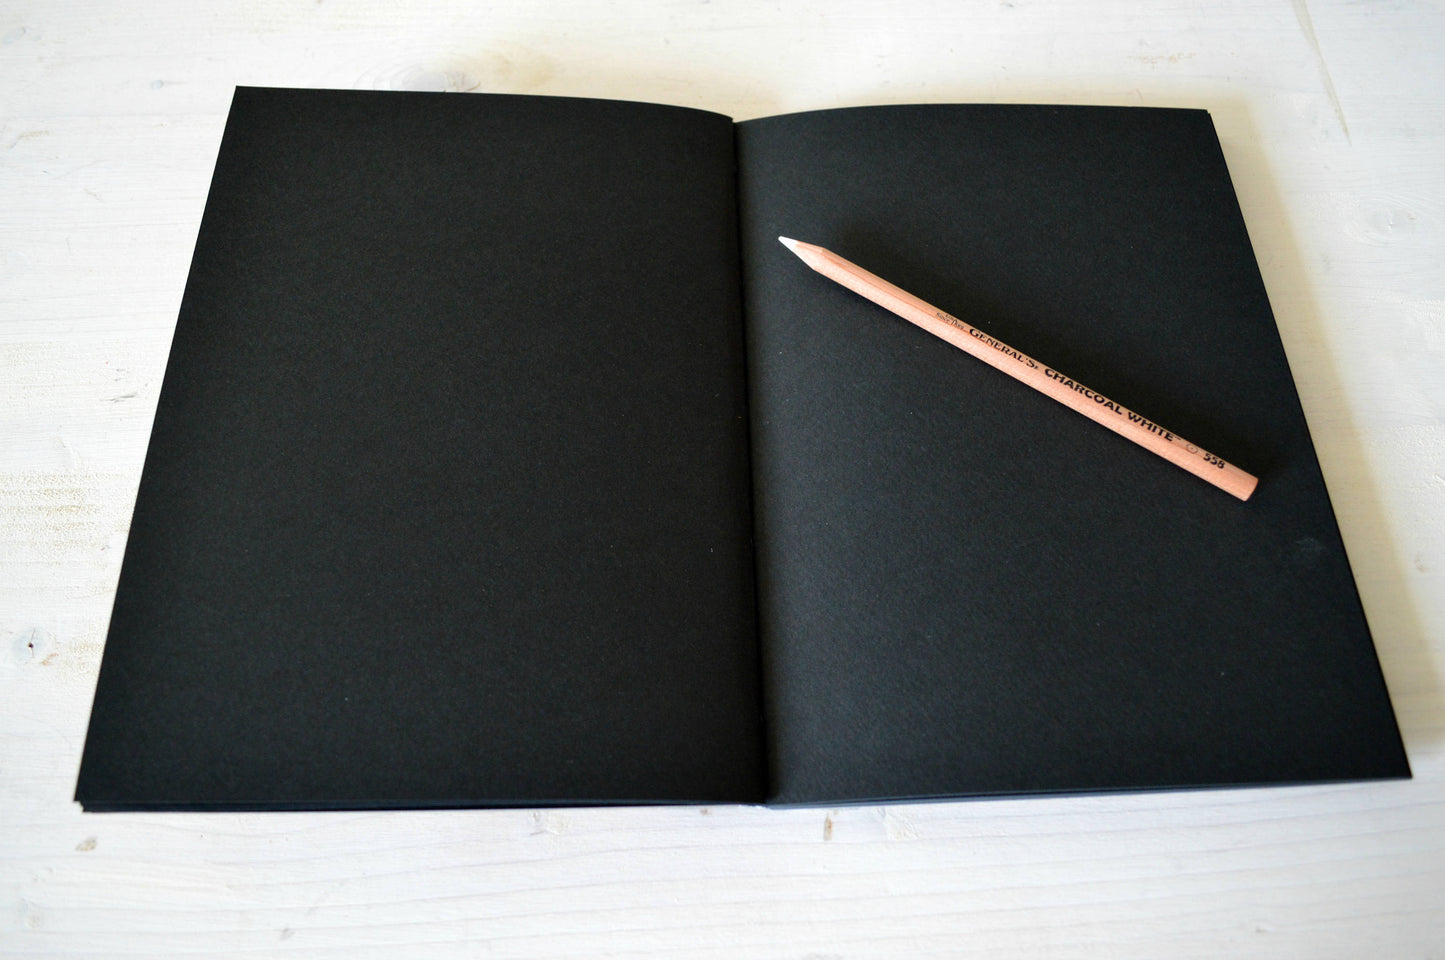 Hardcover Journal Sketchbook with Black pages